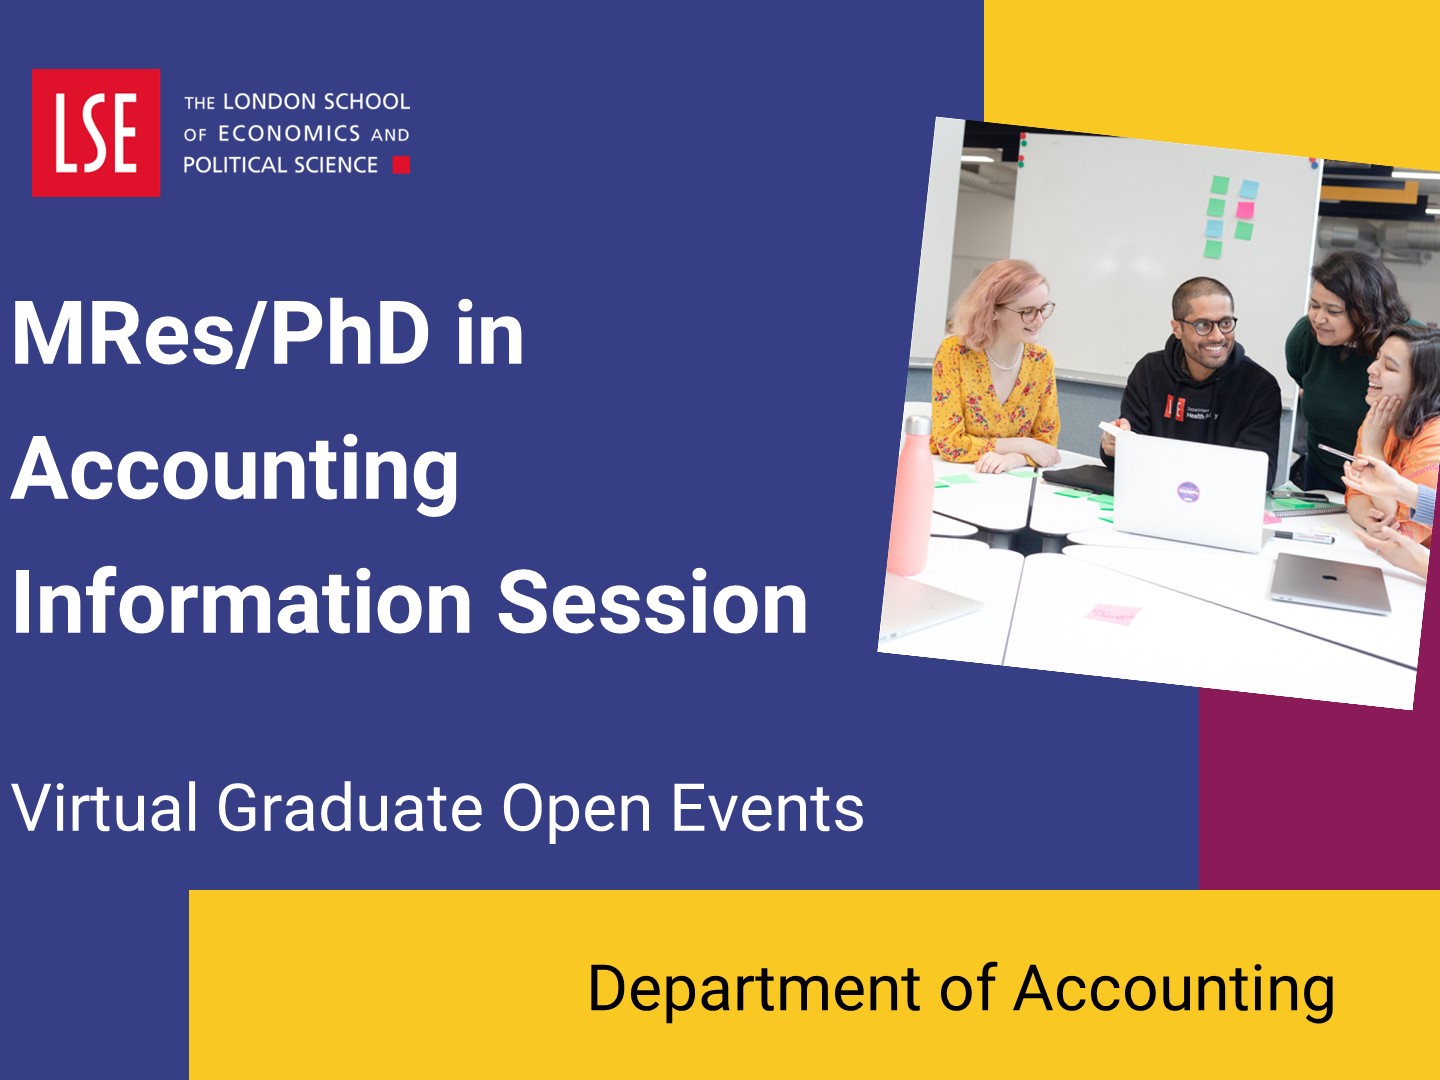 Introduction to MRes/PhD in Accounting